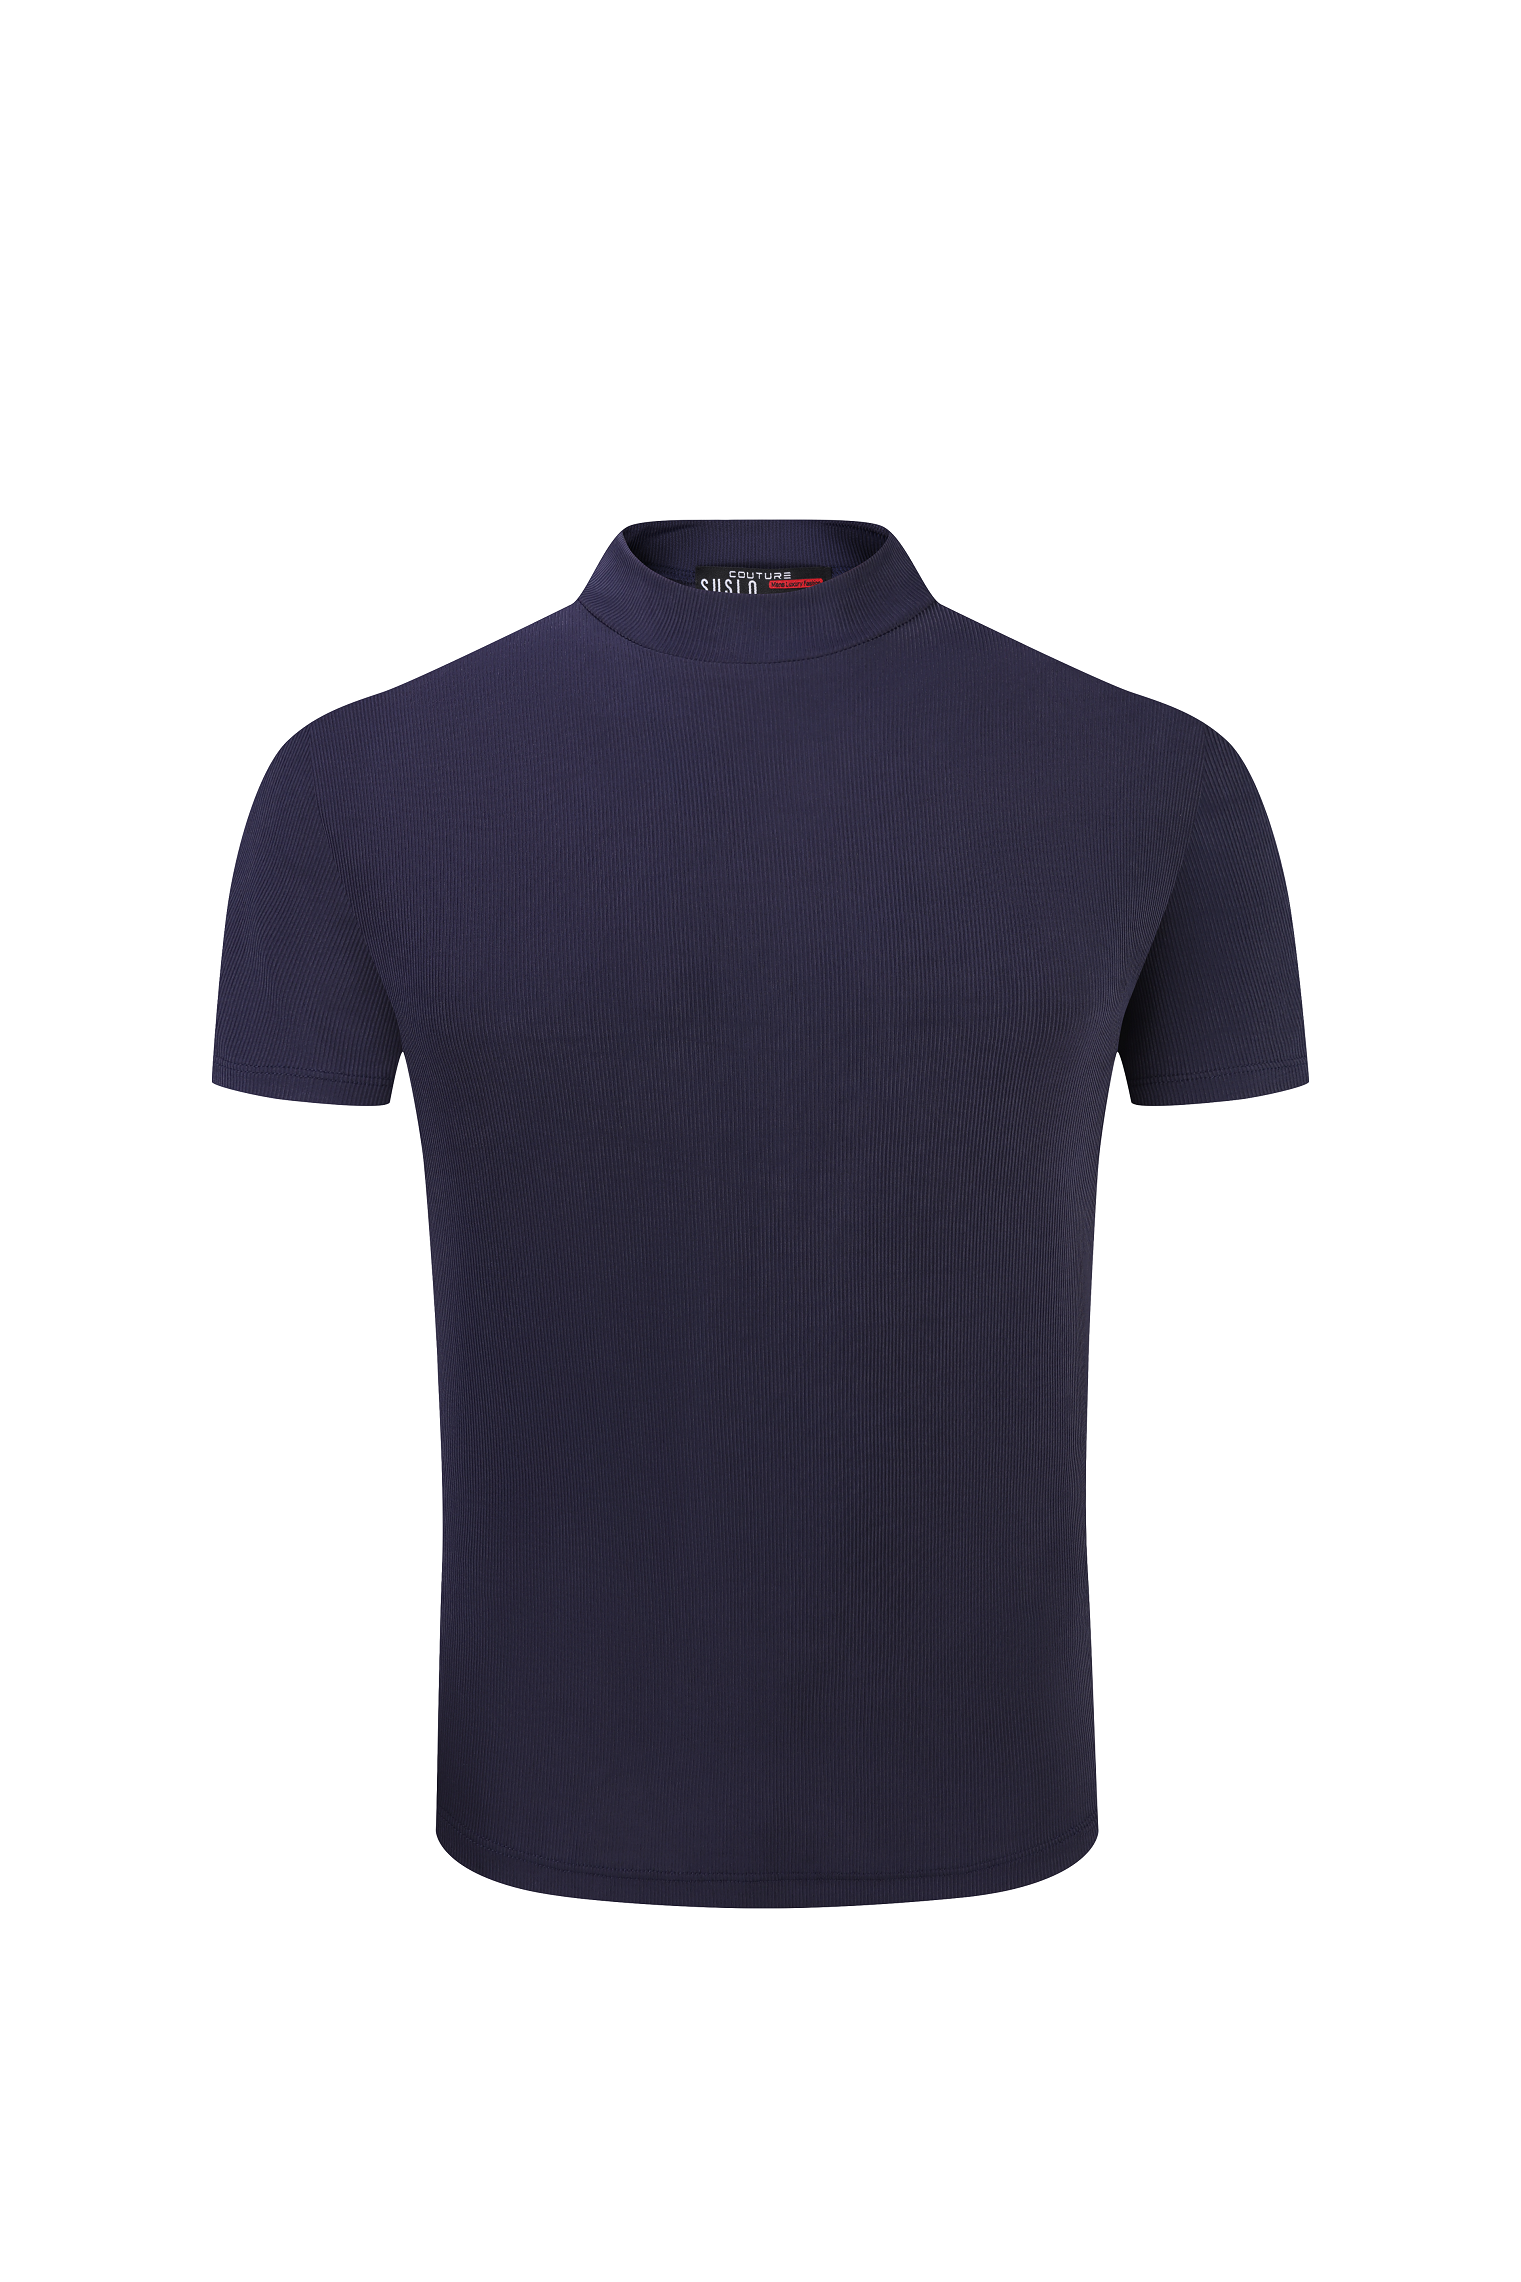 Stretch Luxury Ribbed Tee - Navy